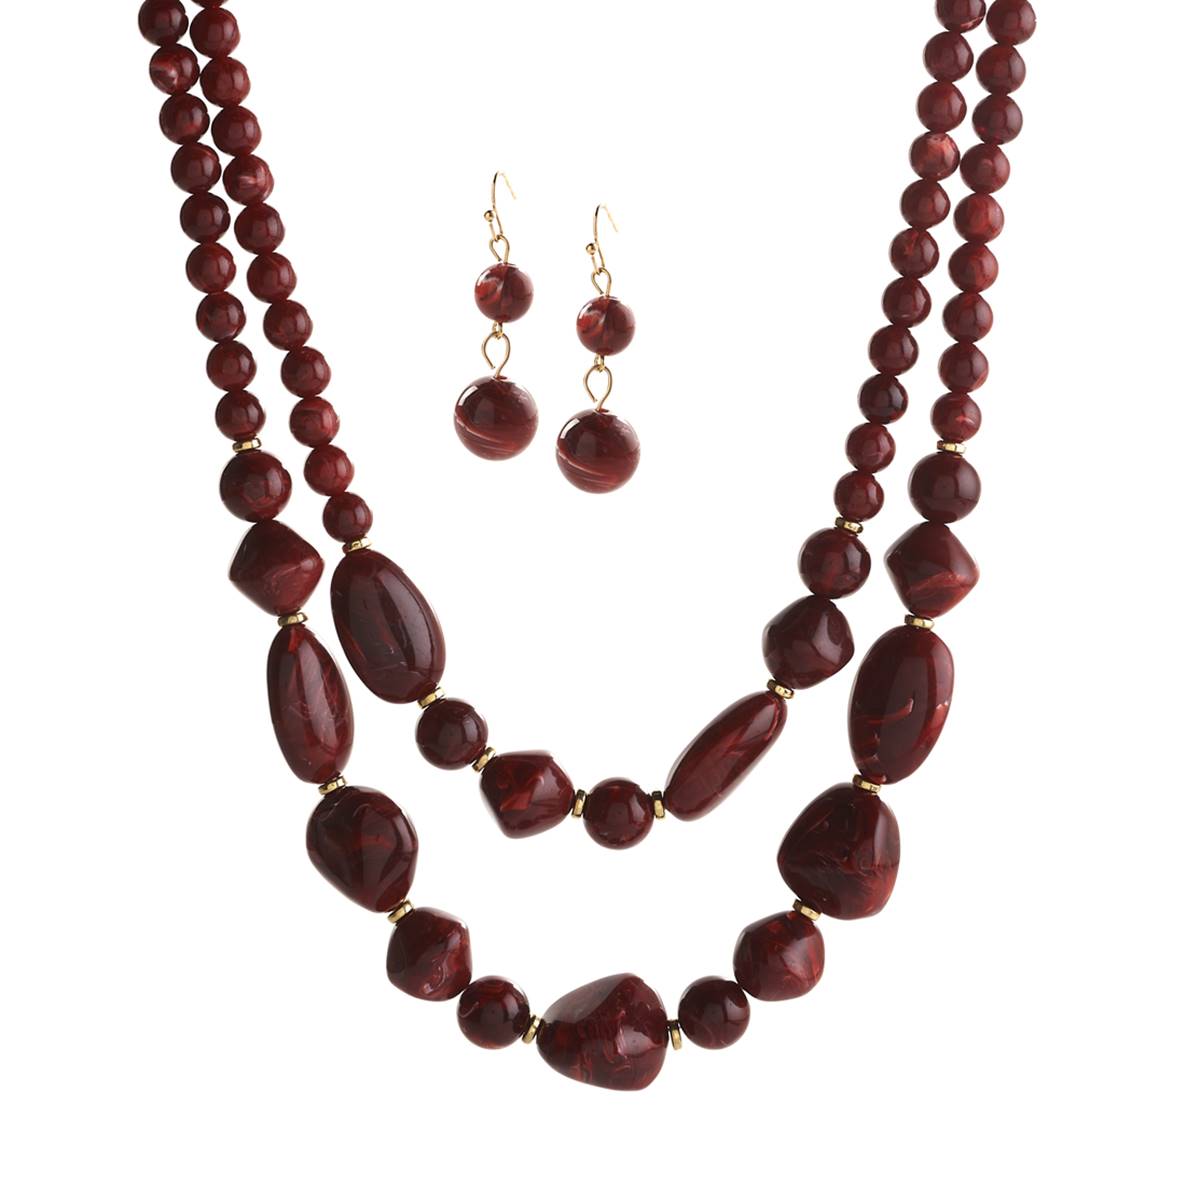 Ashley Cooper(tm) 2-Row Wine Marbled Beaded Necklace & Earrings